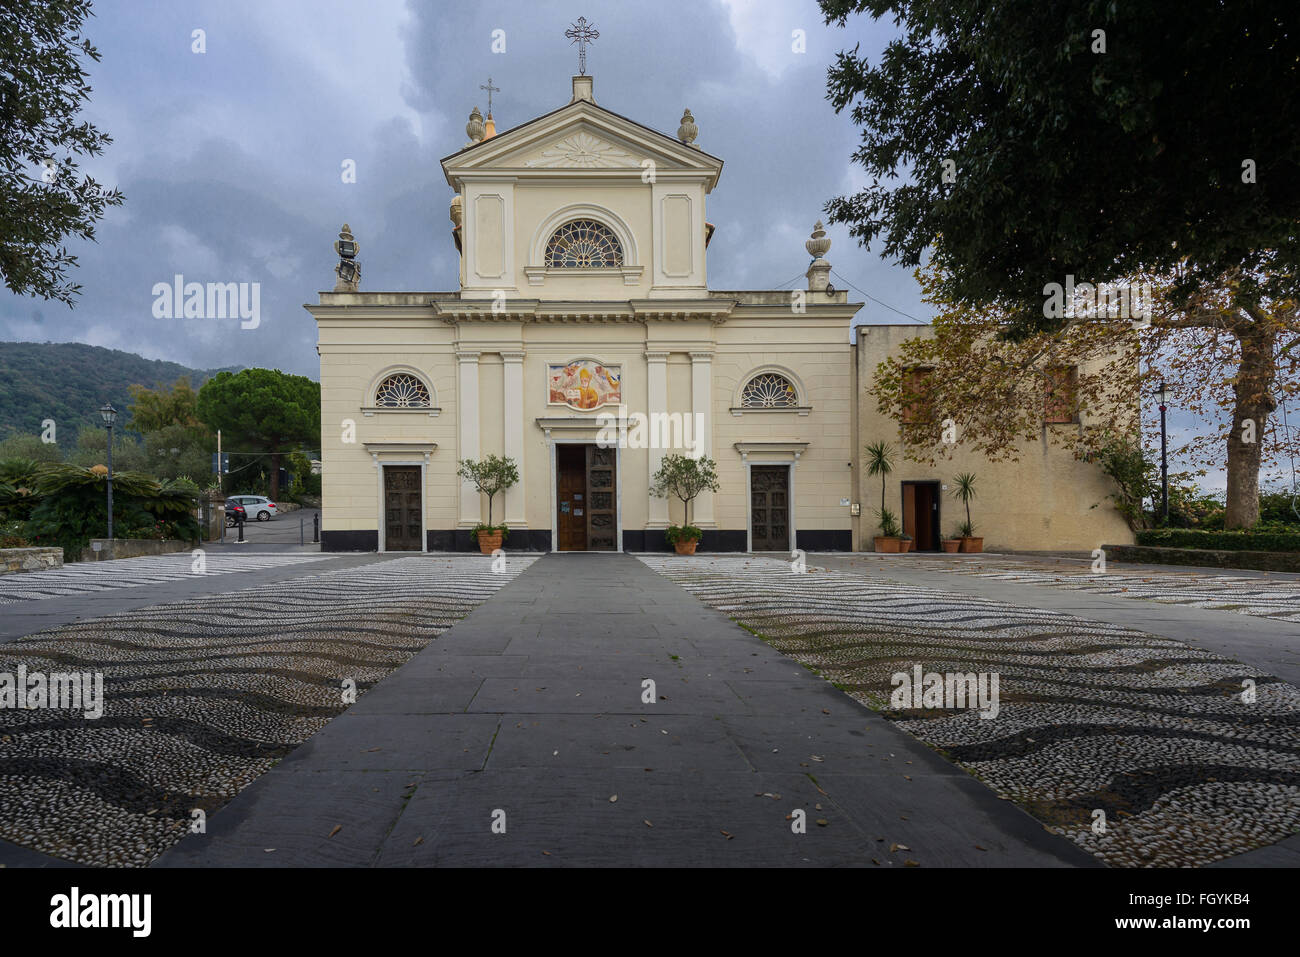 Ancient church of Sant'Ambrogio situated in Zoagli, Italy Stock Photo